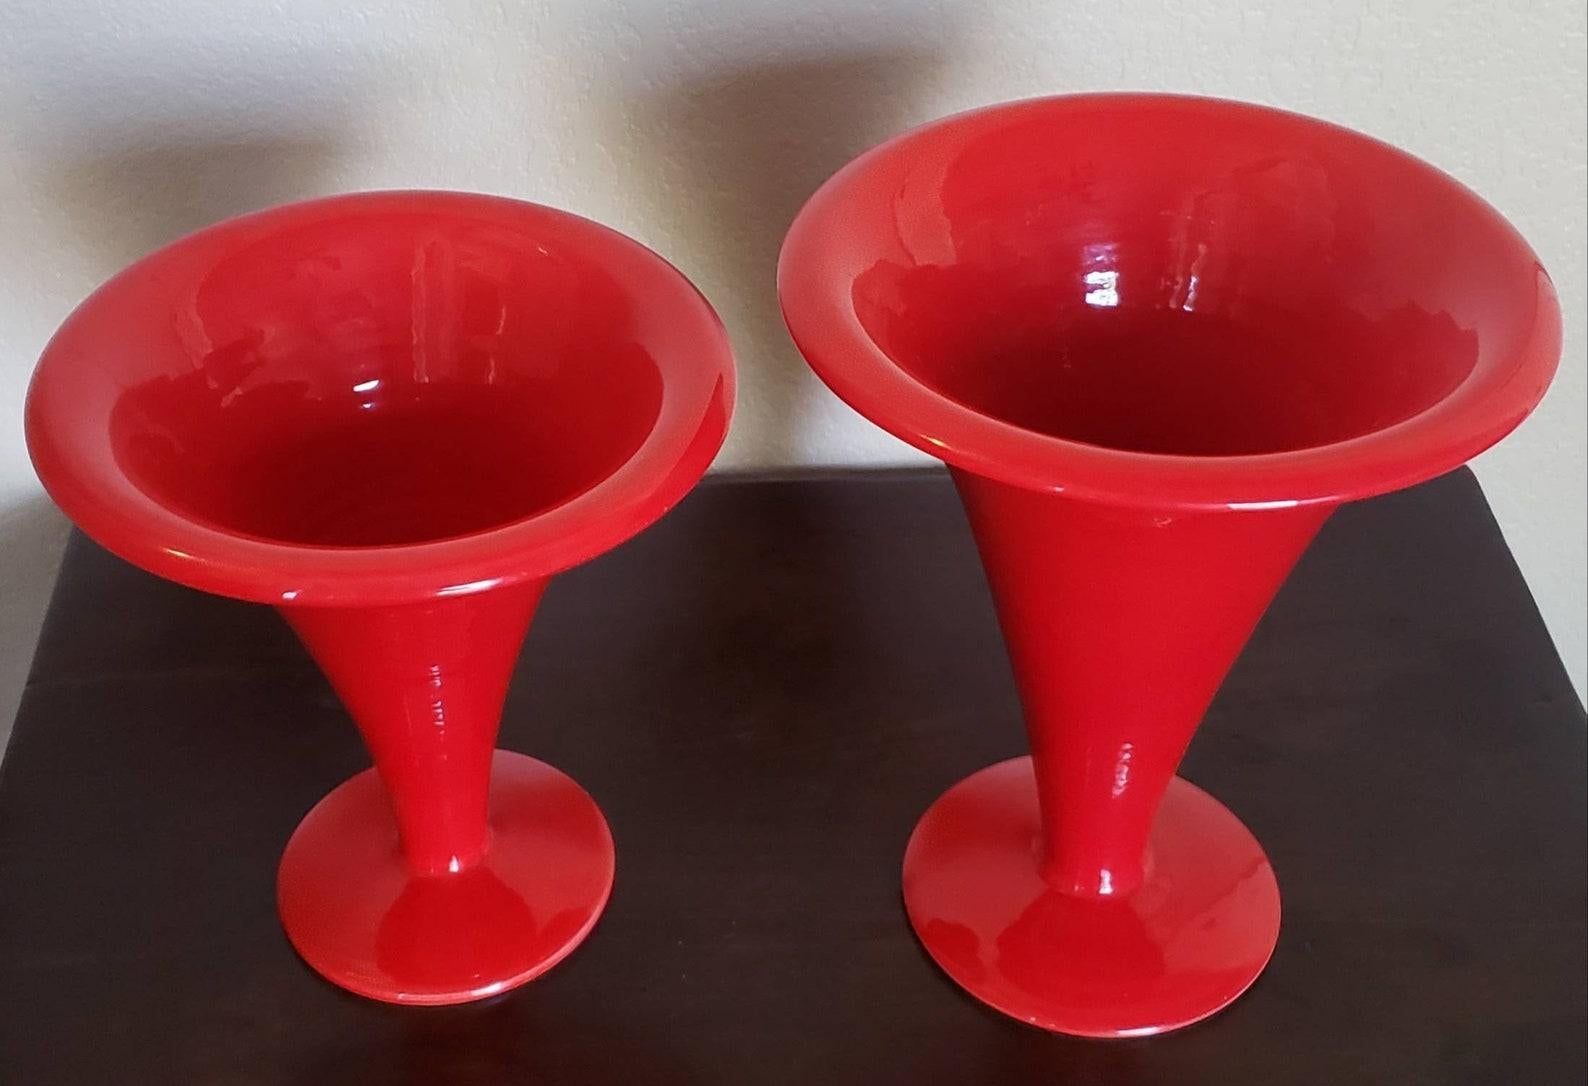 Scarce pair of vintage Italian Mid-Century Modern Italica ARS large hand-turned Fine pottery vases. Bright atomic red glaze with wide rim on tapered body, ending in circular foot, marked Italica ARS underfoot. 
Circa 1955-1965, Italy.

This